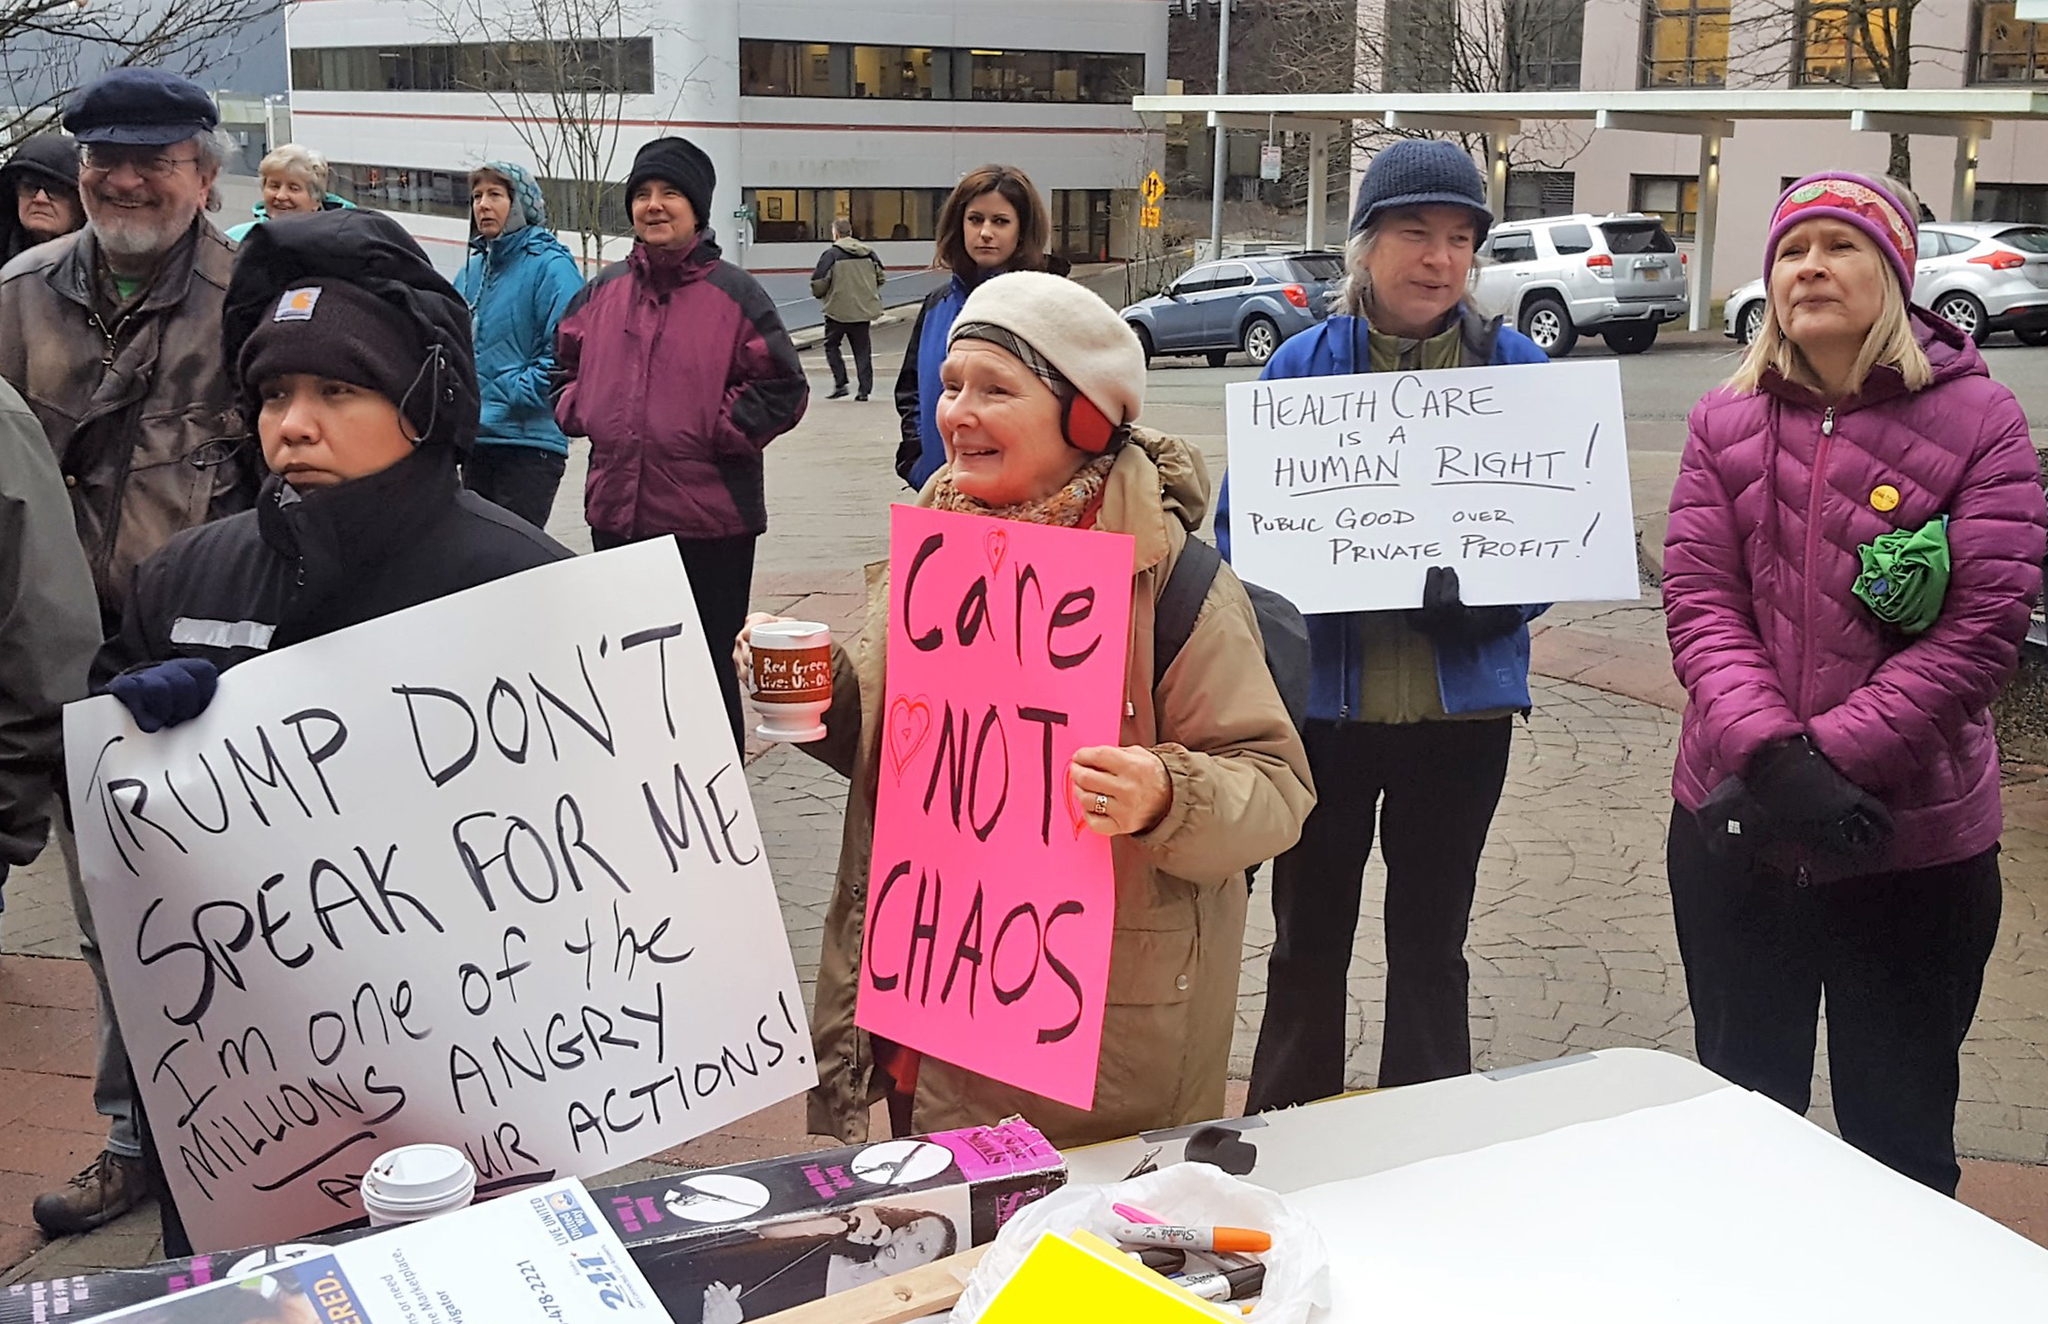 Protesters advocating for affordable healthcare rallied across the street from the Capitol Wednesday. (Liz Kellar | Juneau Empire)